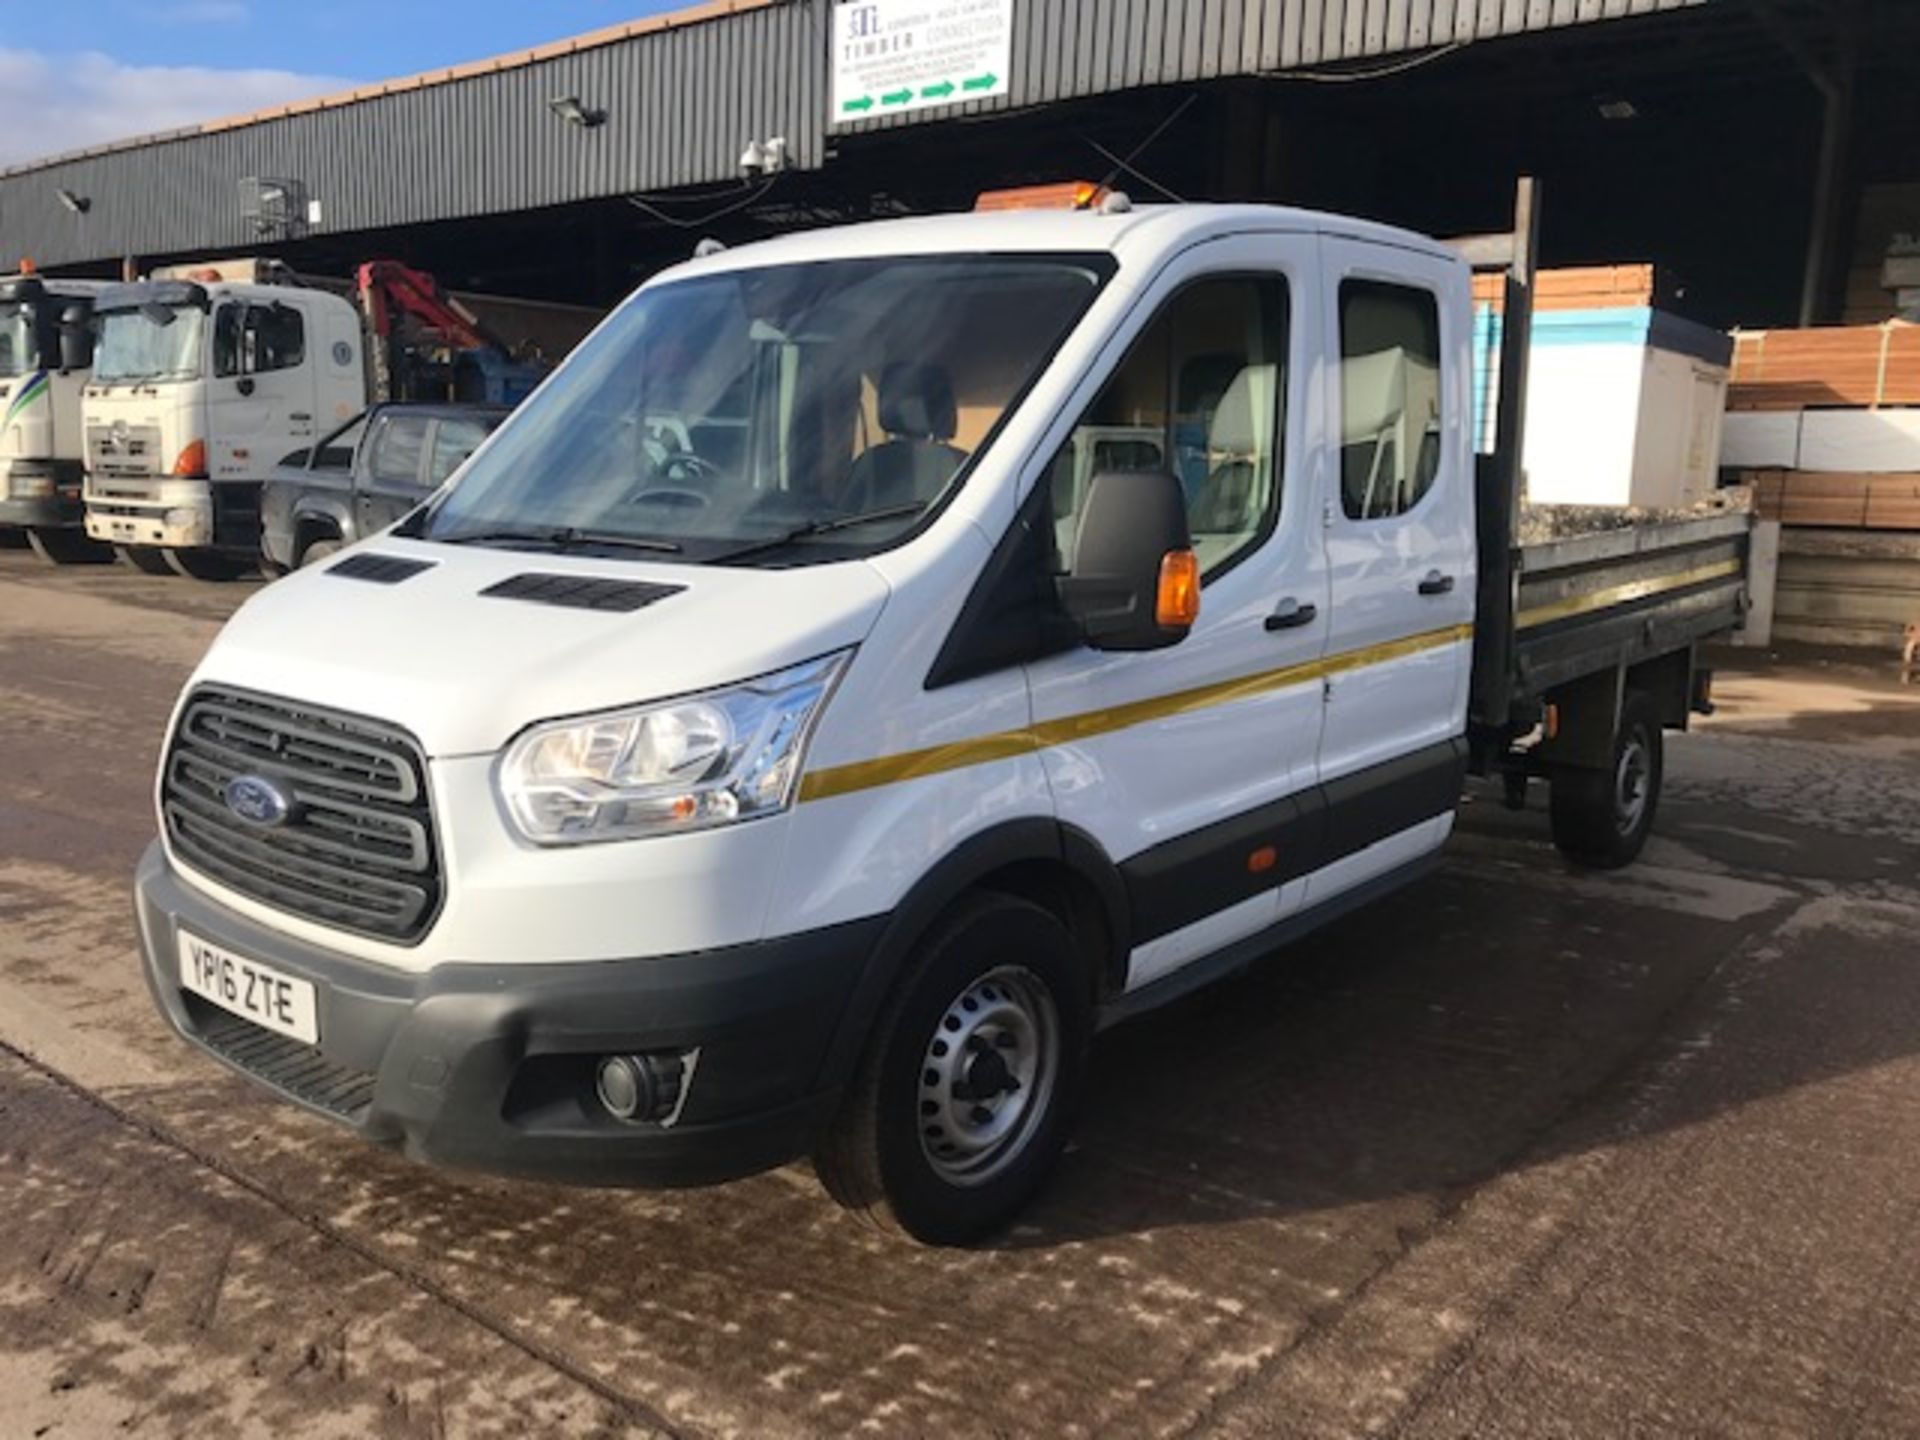 2016 Ford Transit 350 Double cab Tipper - Image 6 of 11